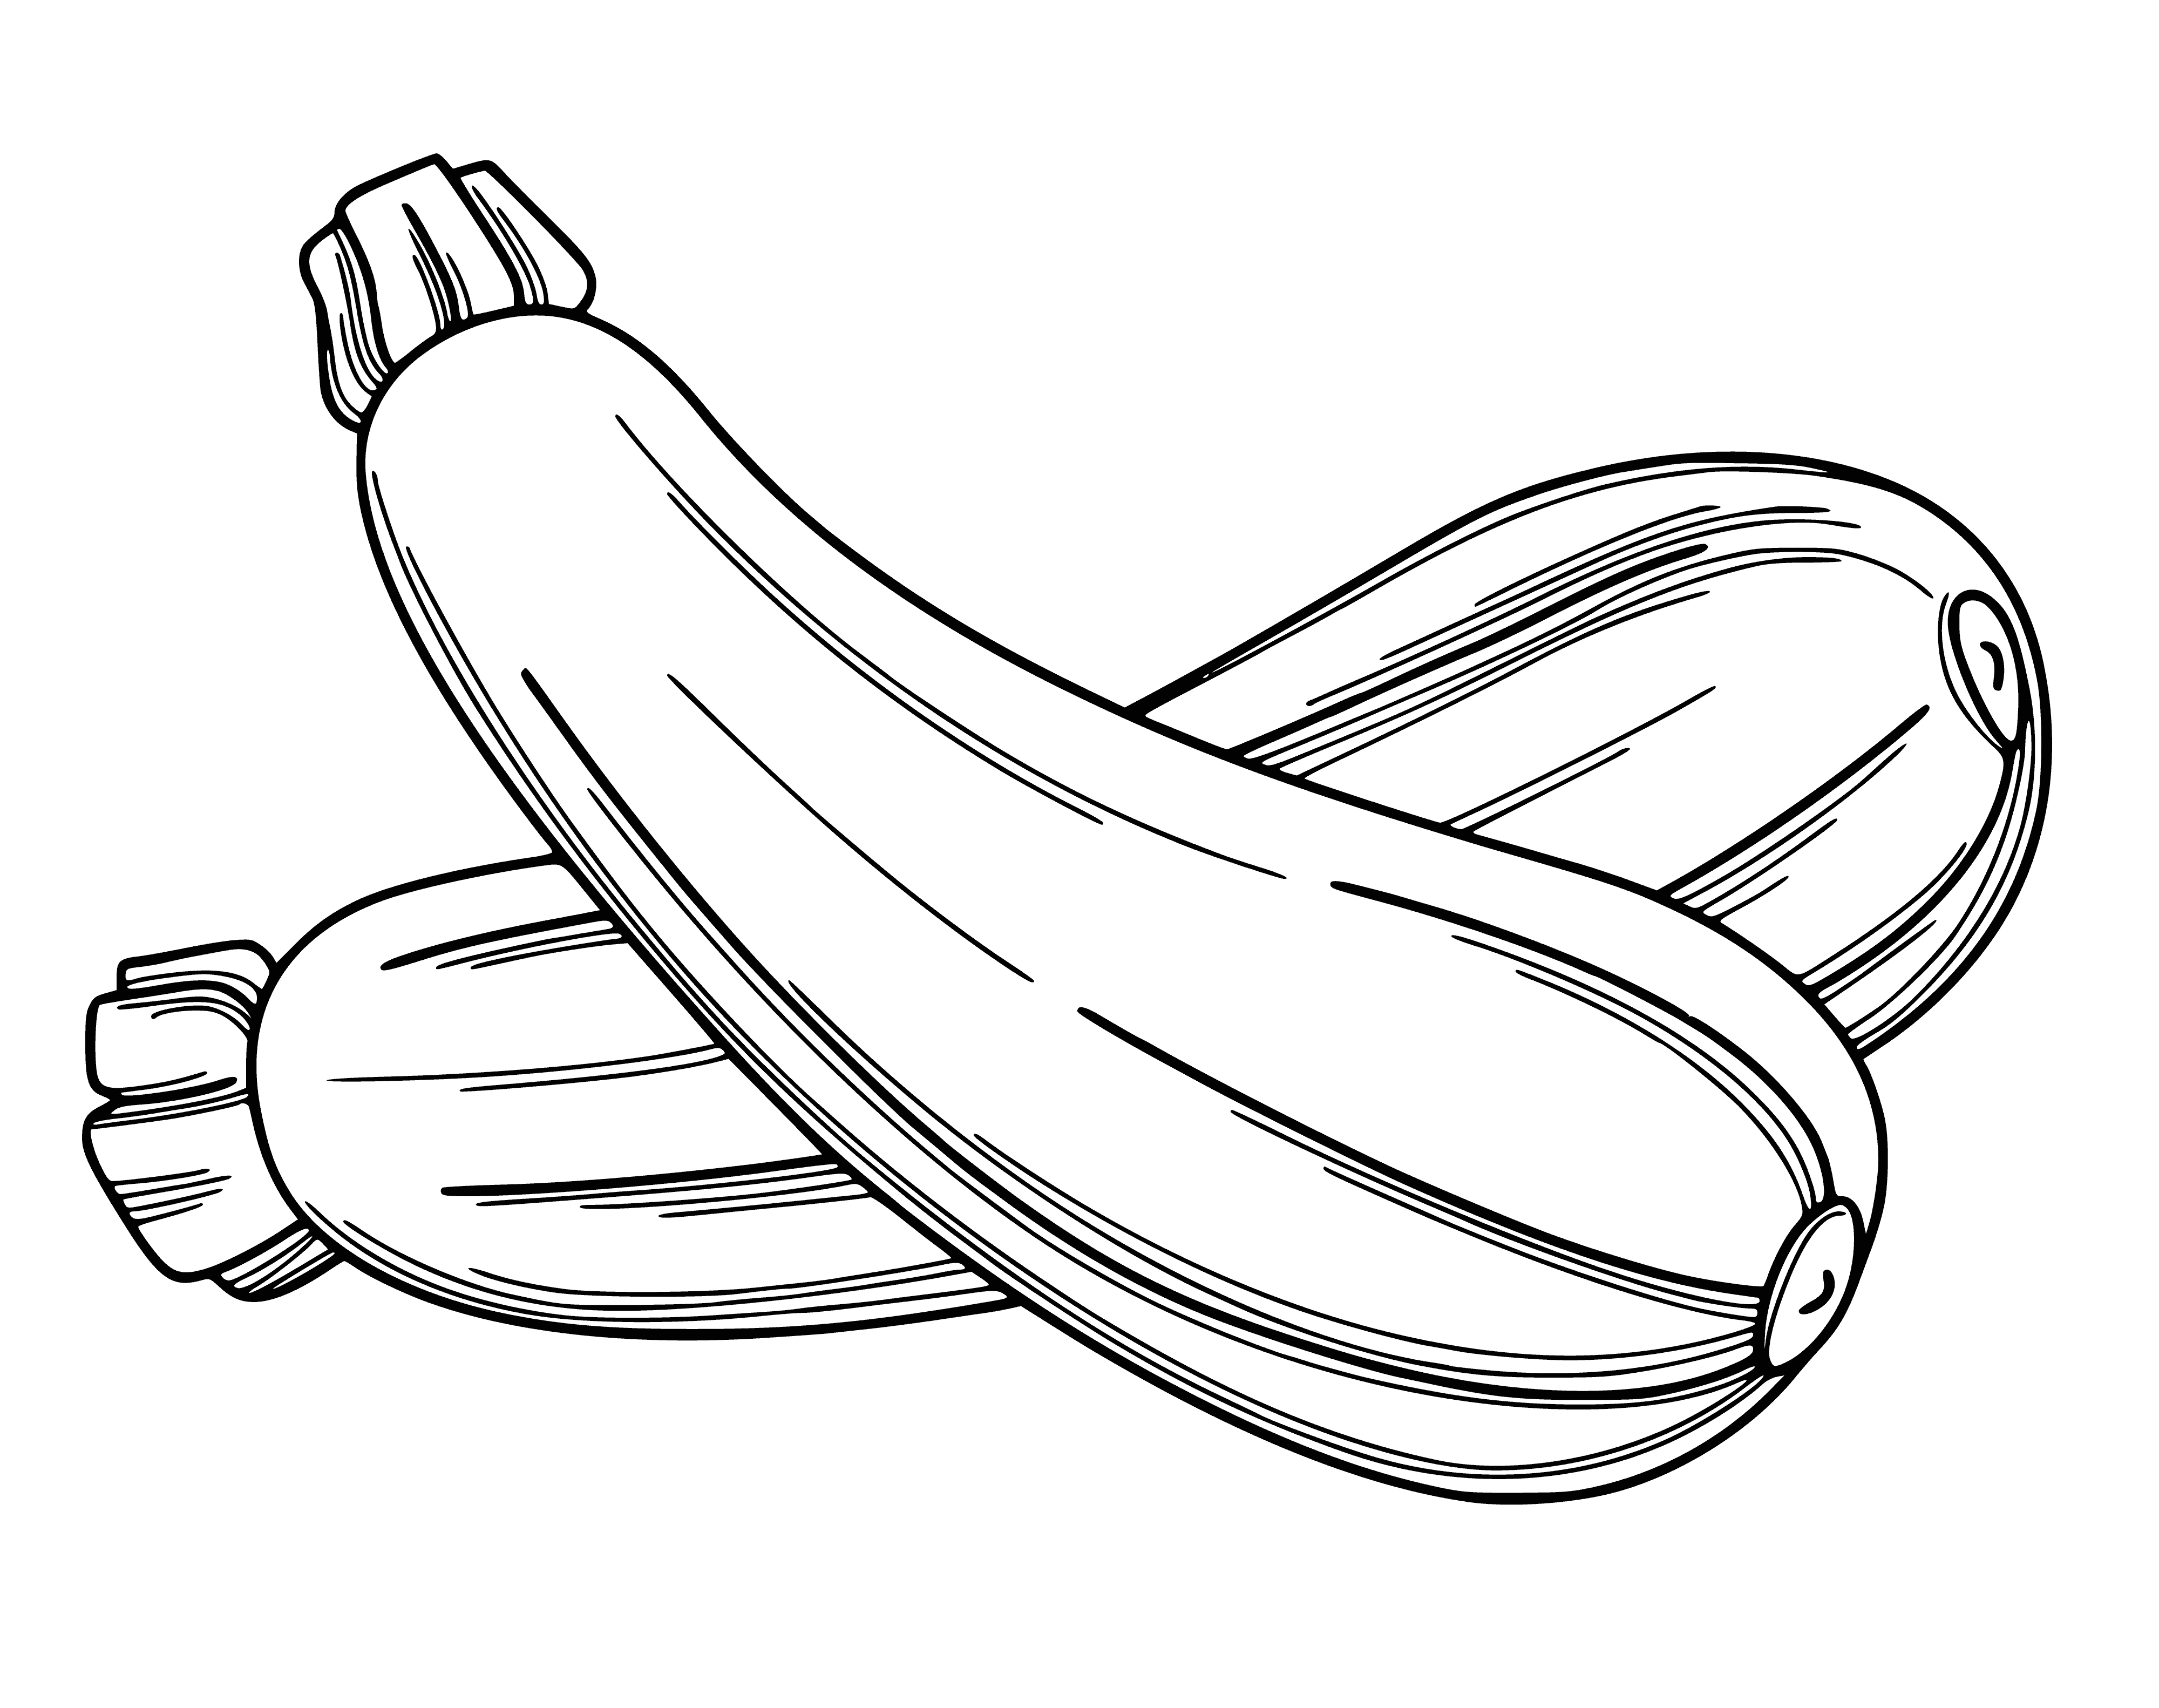 Zucchini coloring page